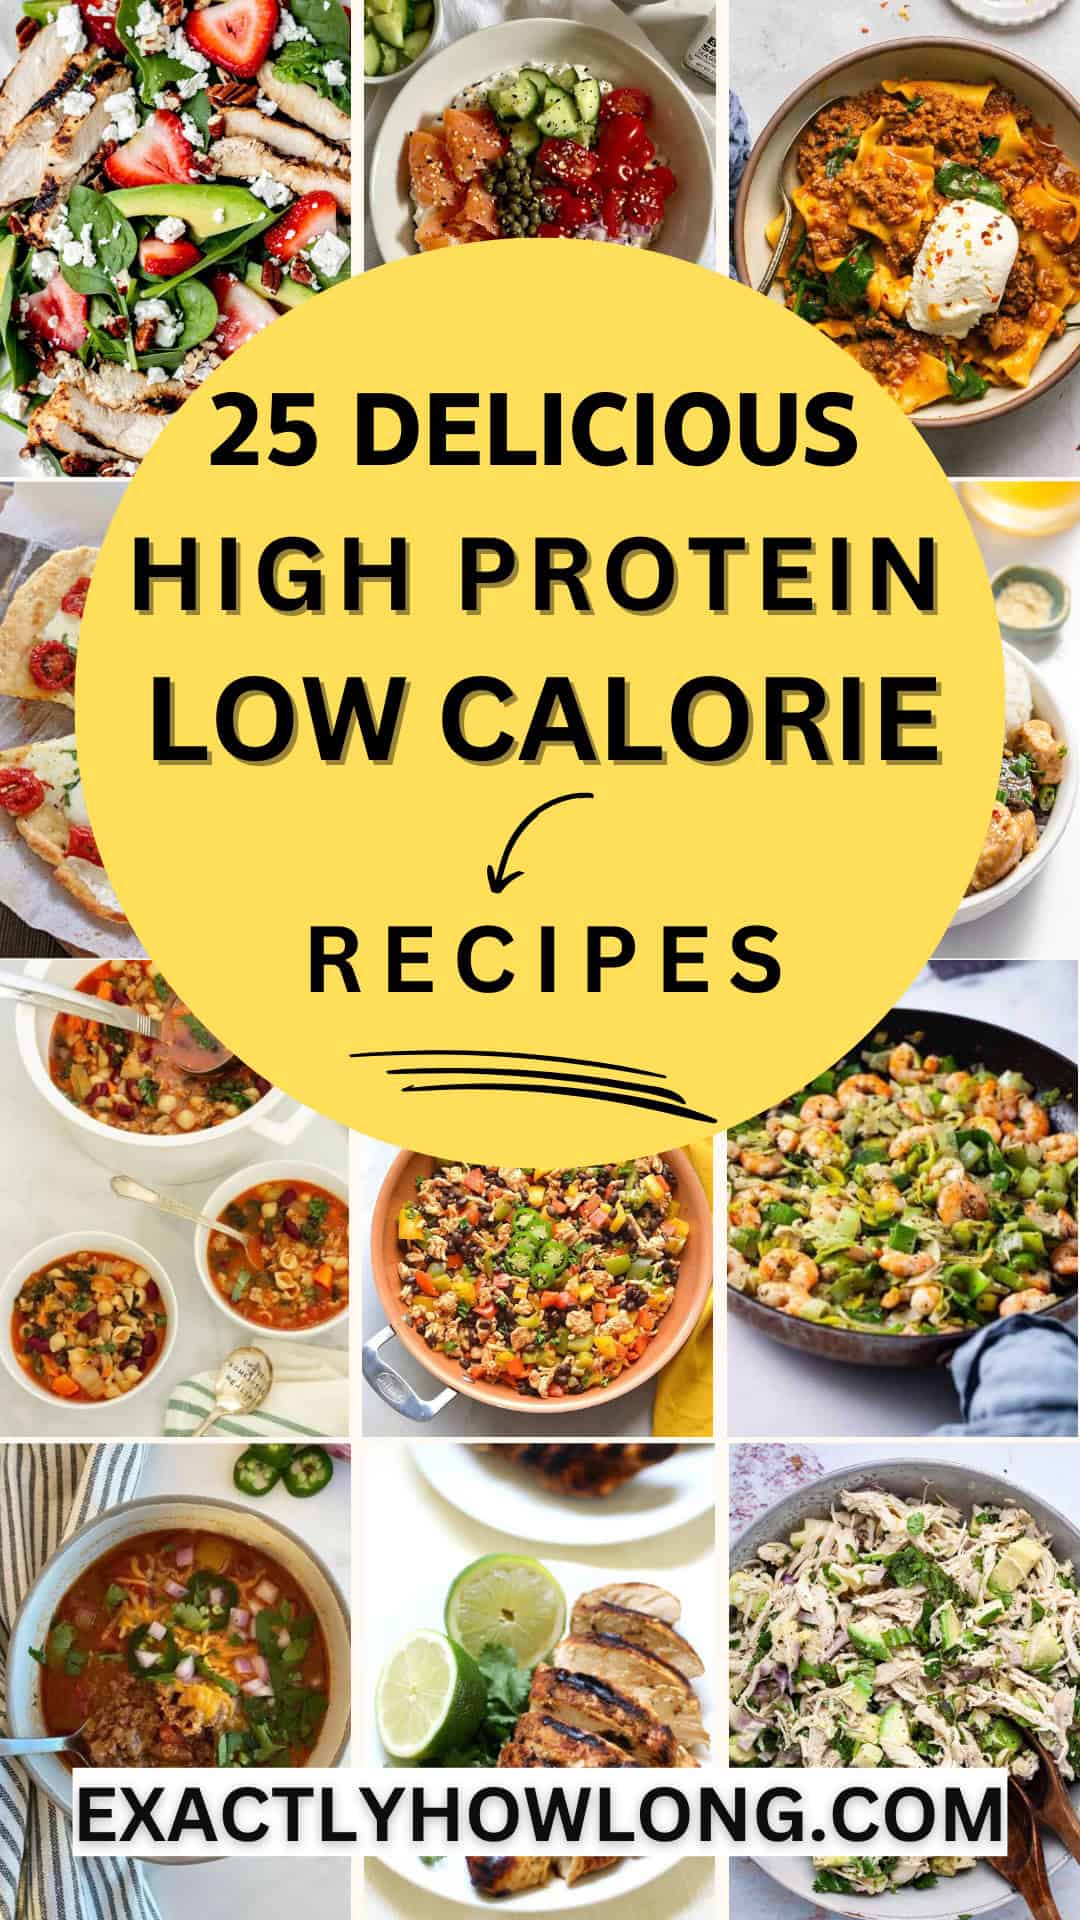 Simple, tasty, high-protein, low-calorie recipes ideal for weight loss